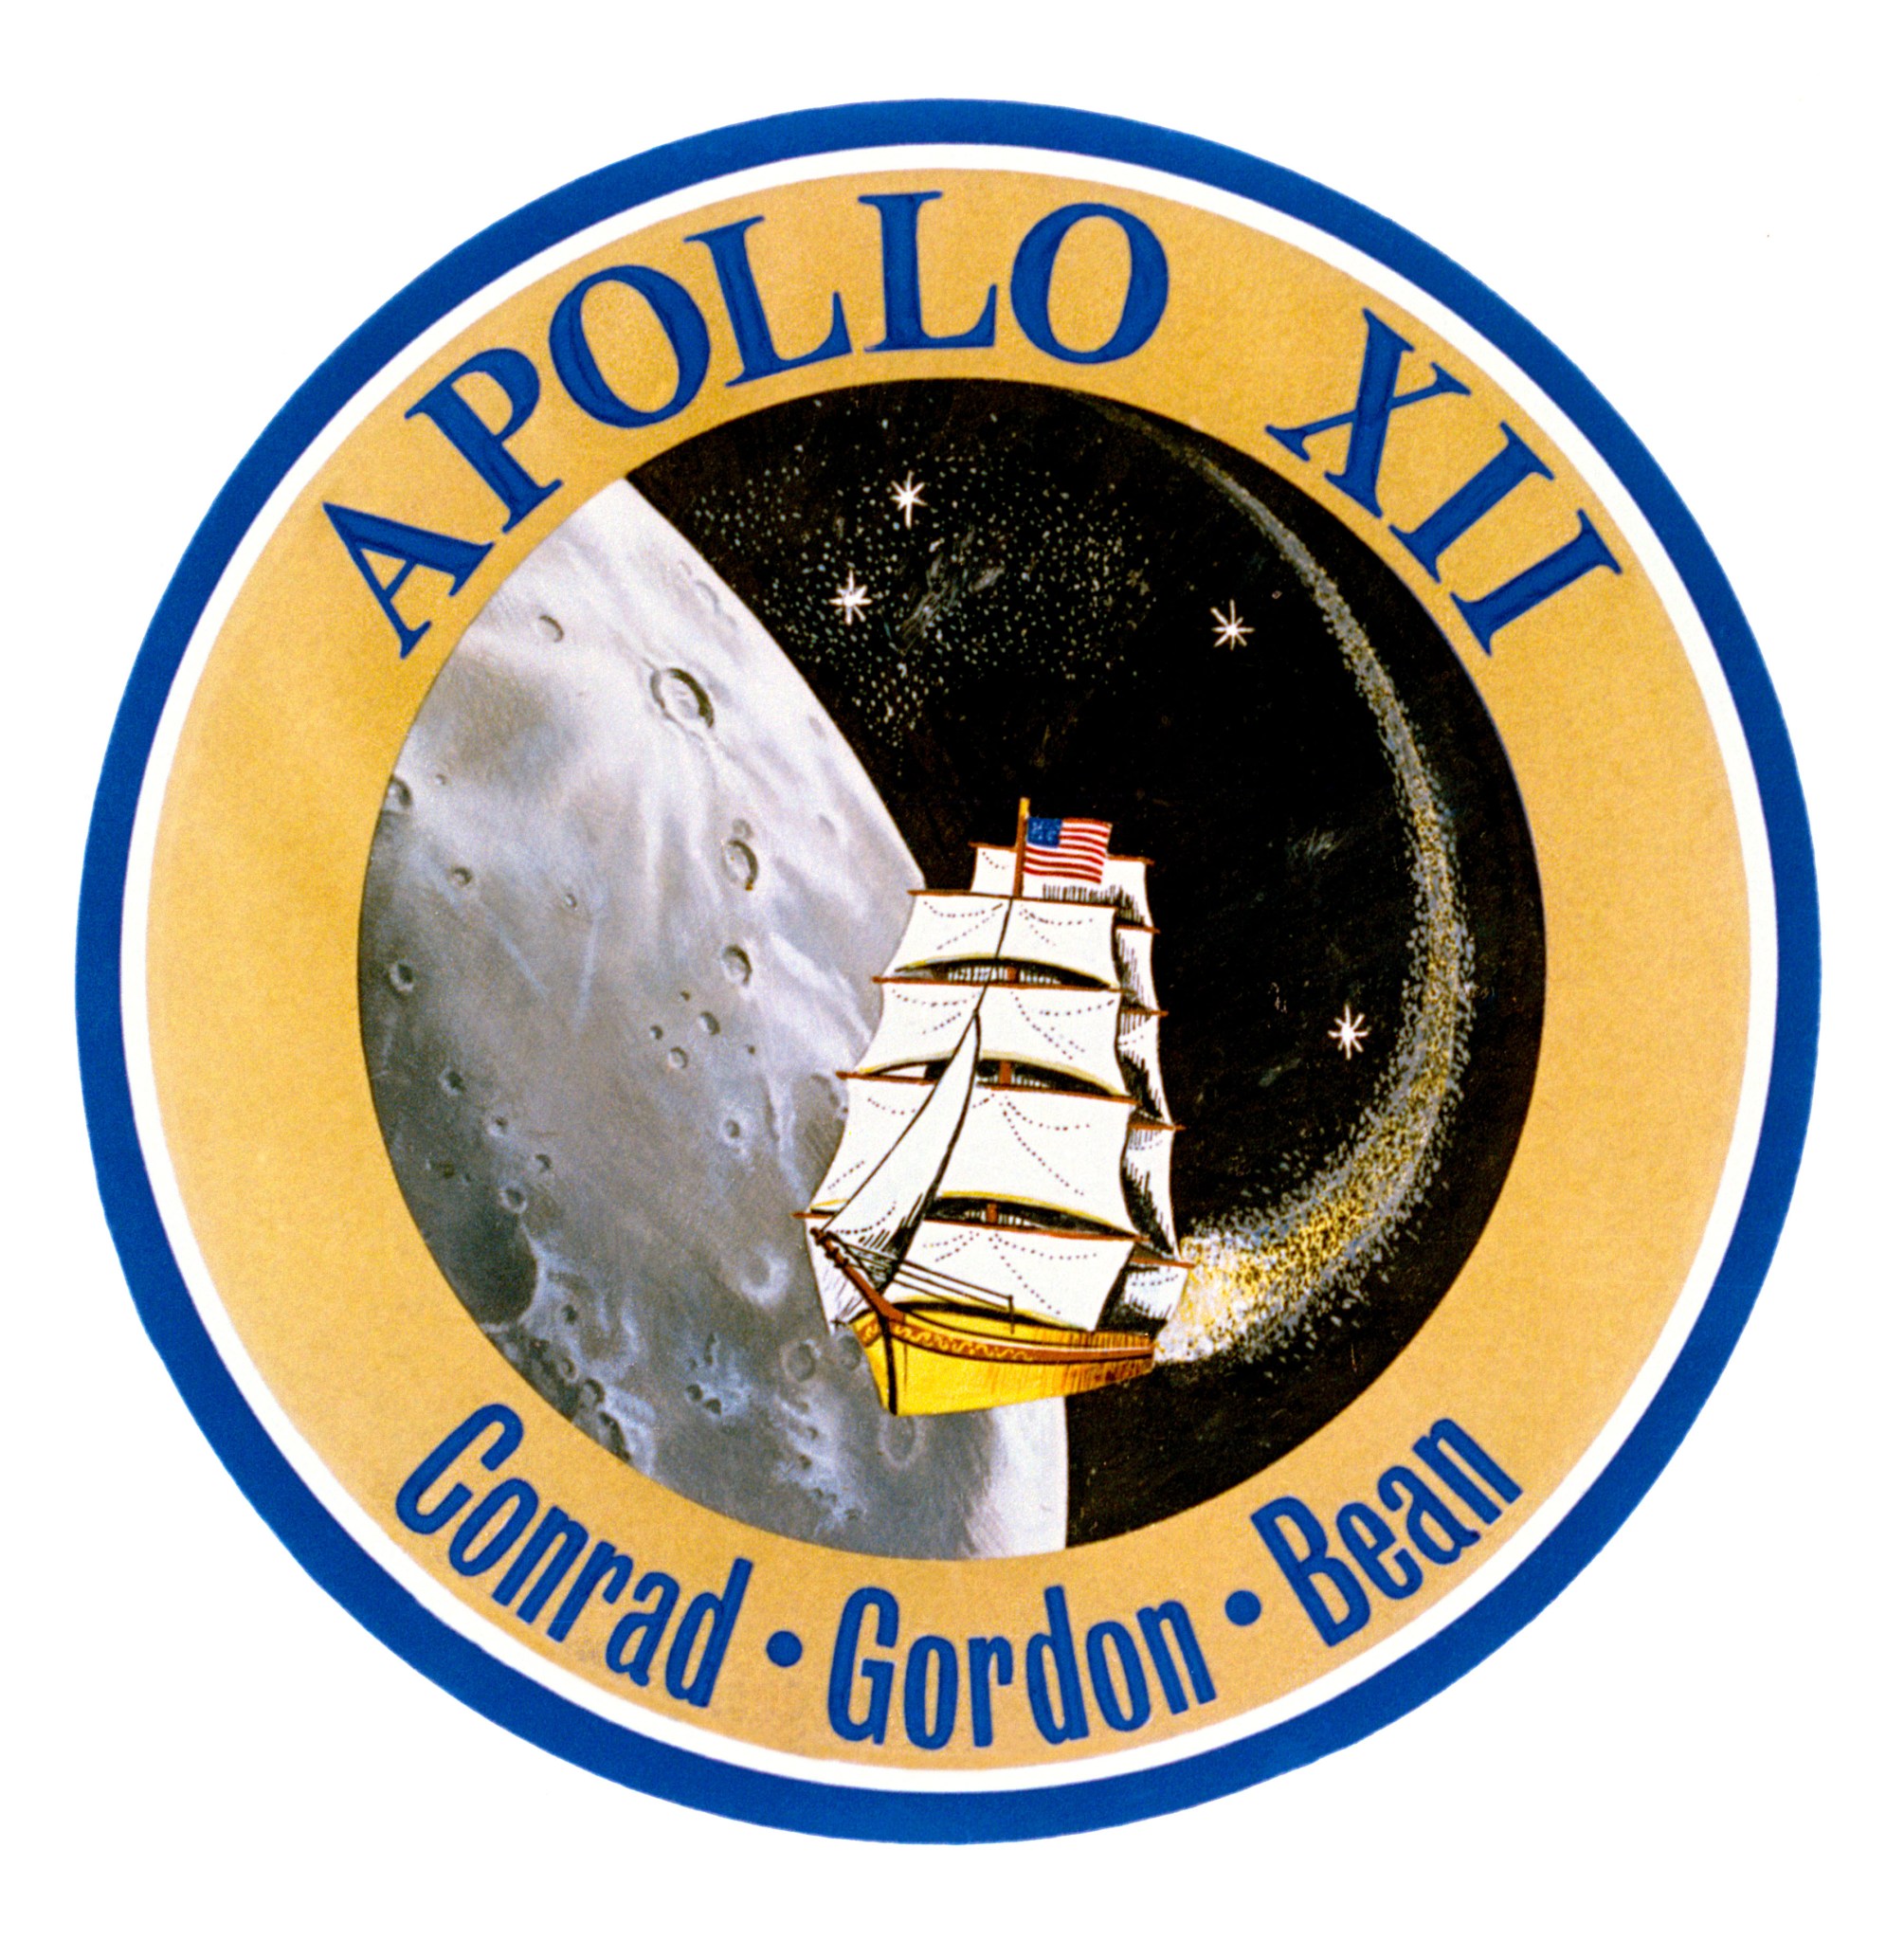 Apollo 12 insignia with image of moon, ship with sails, and names of crew